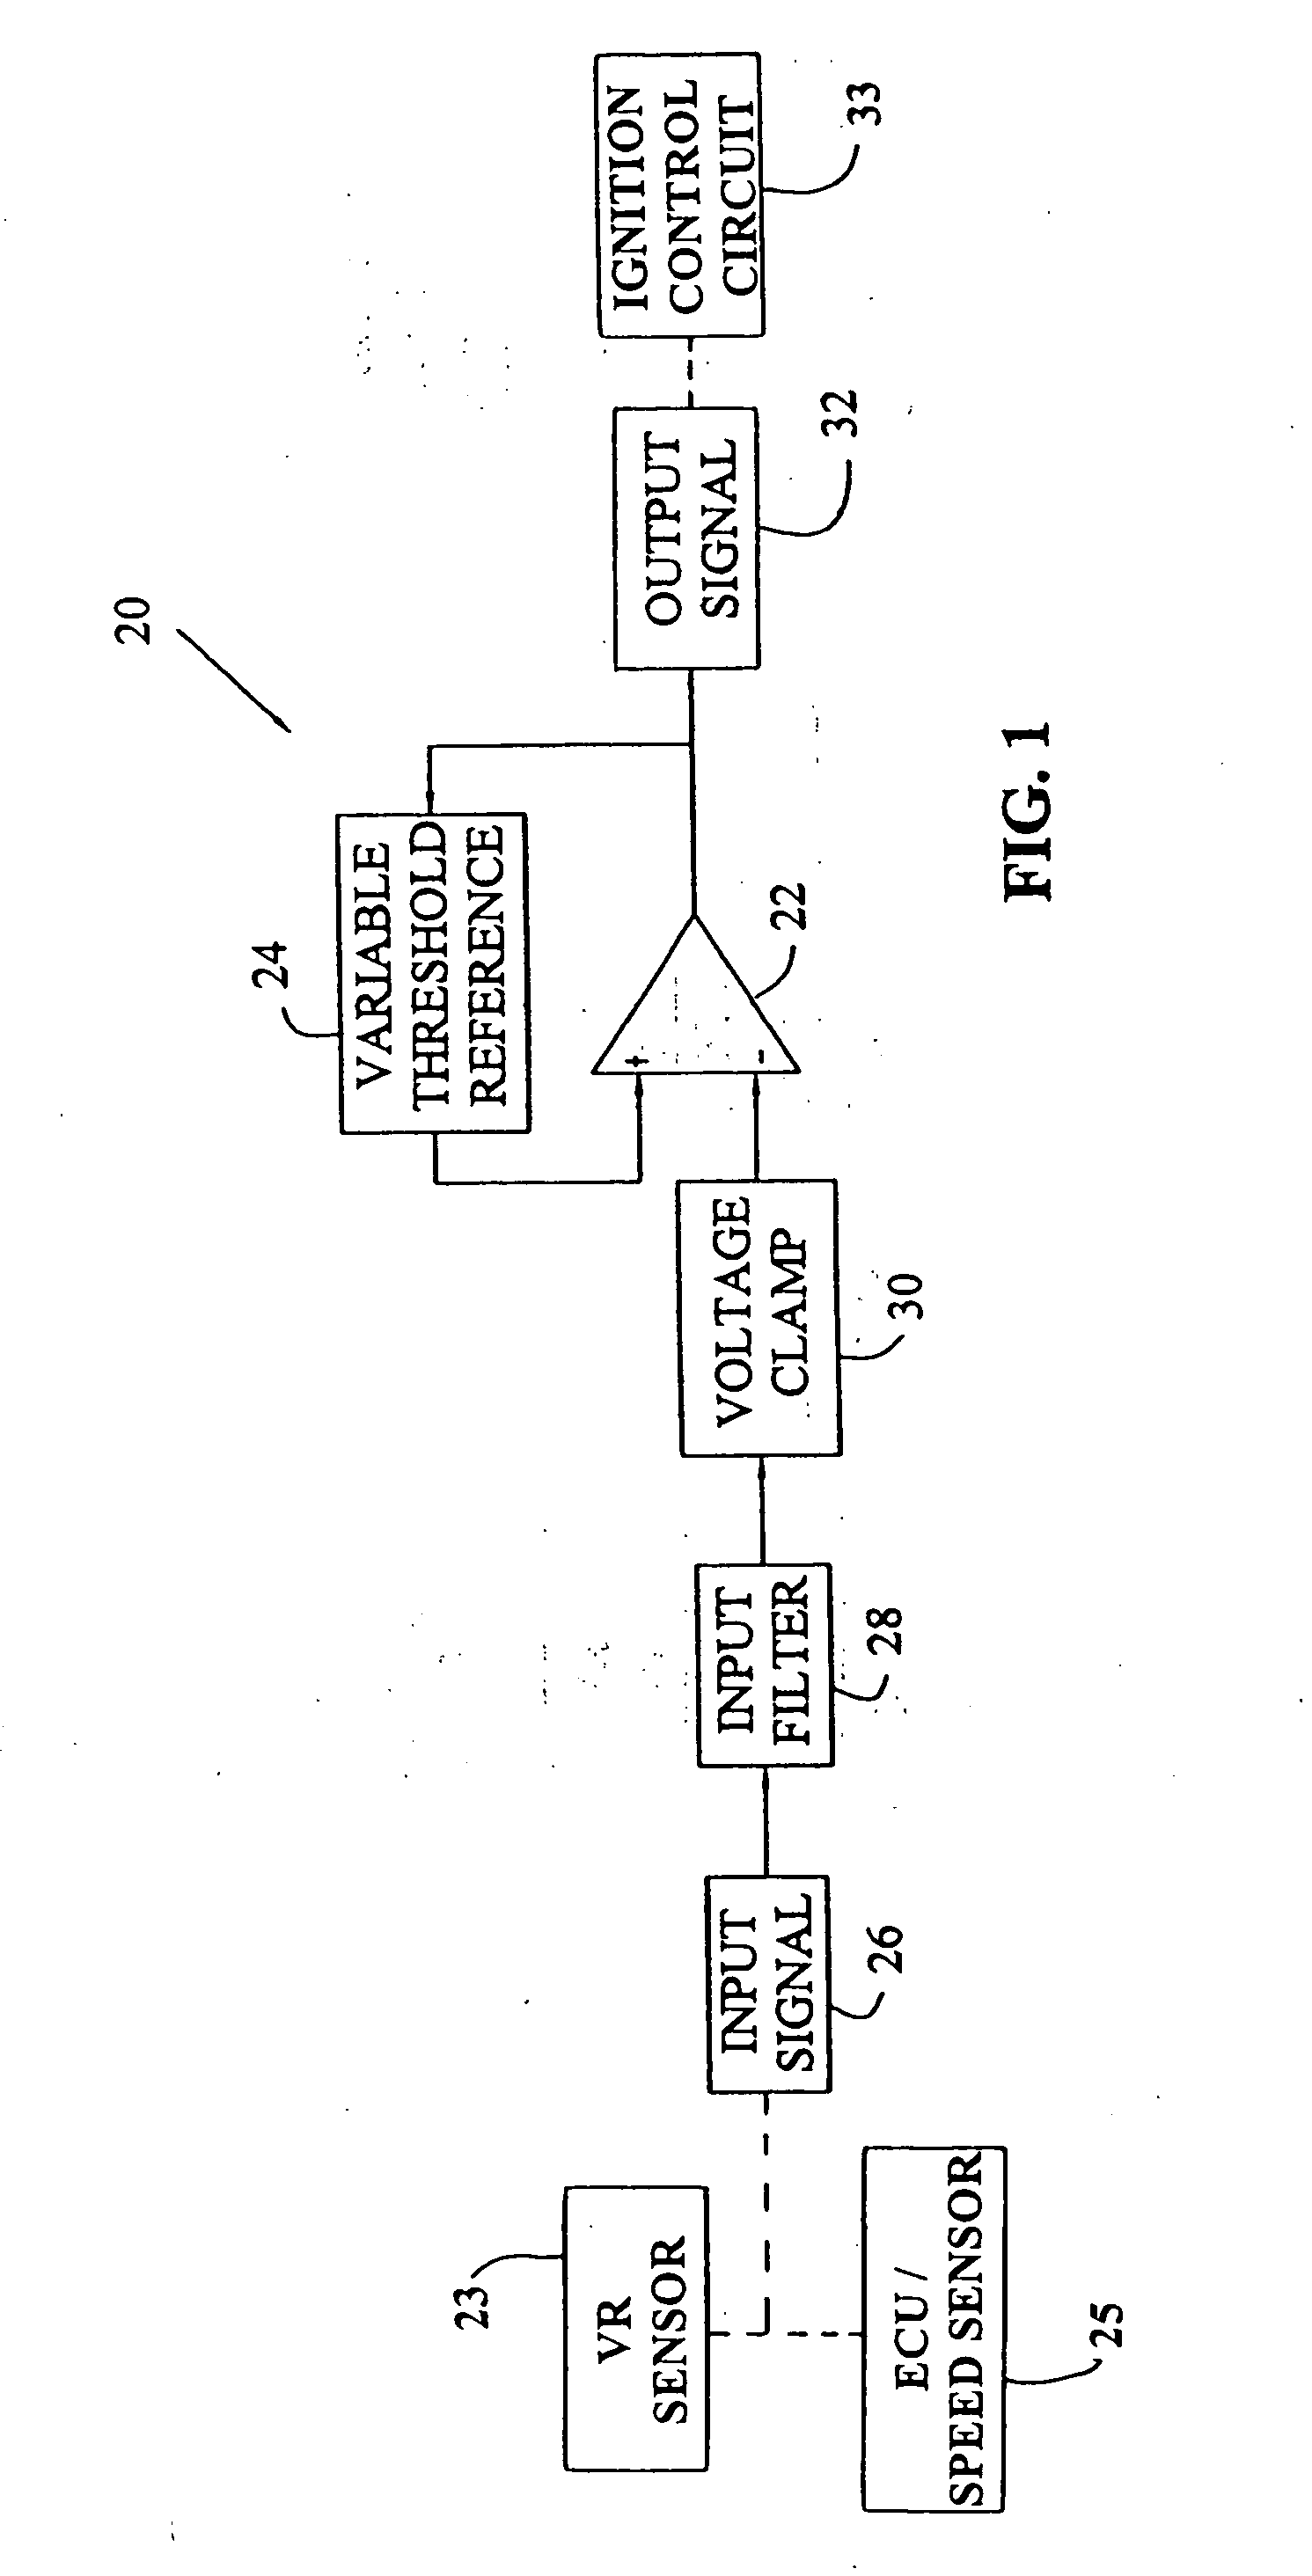 Variable threshold comparator interface circuit